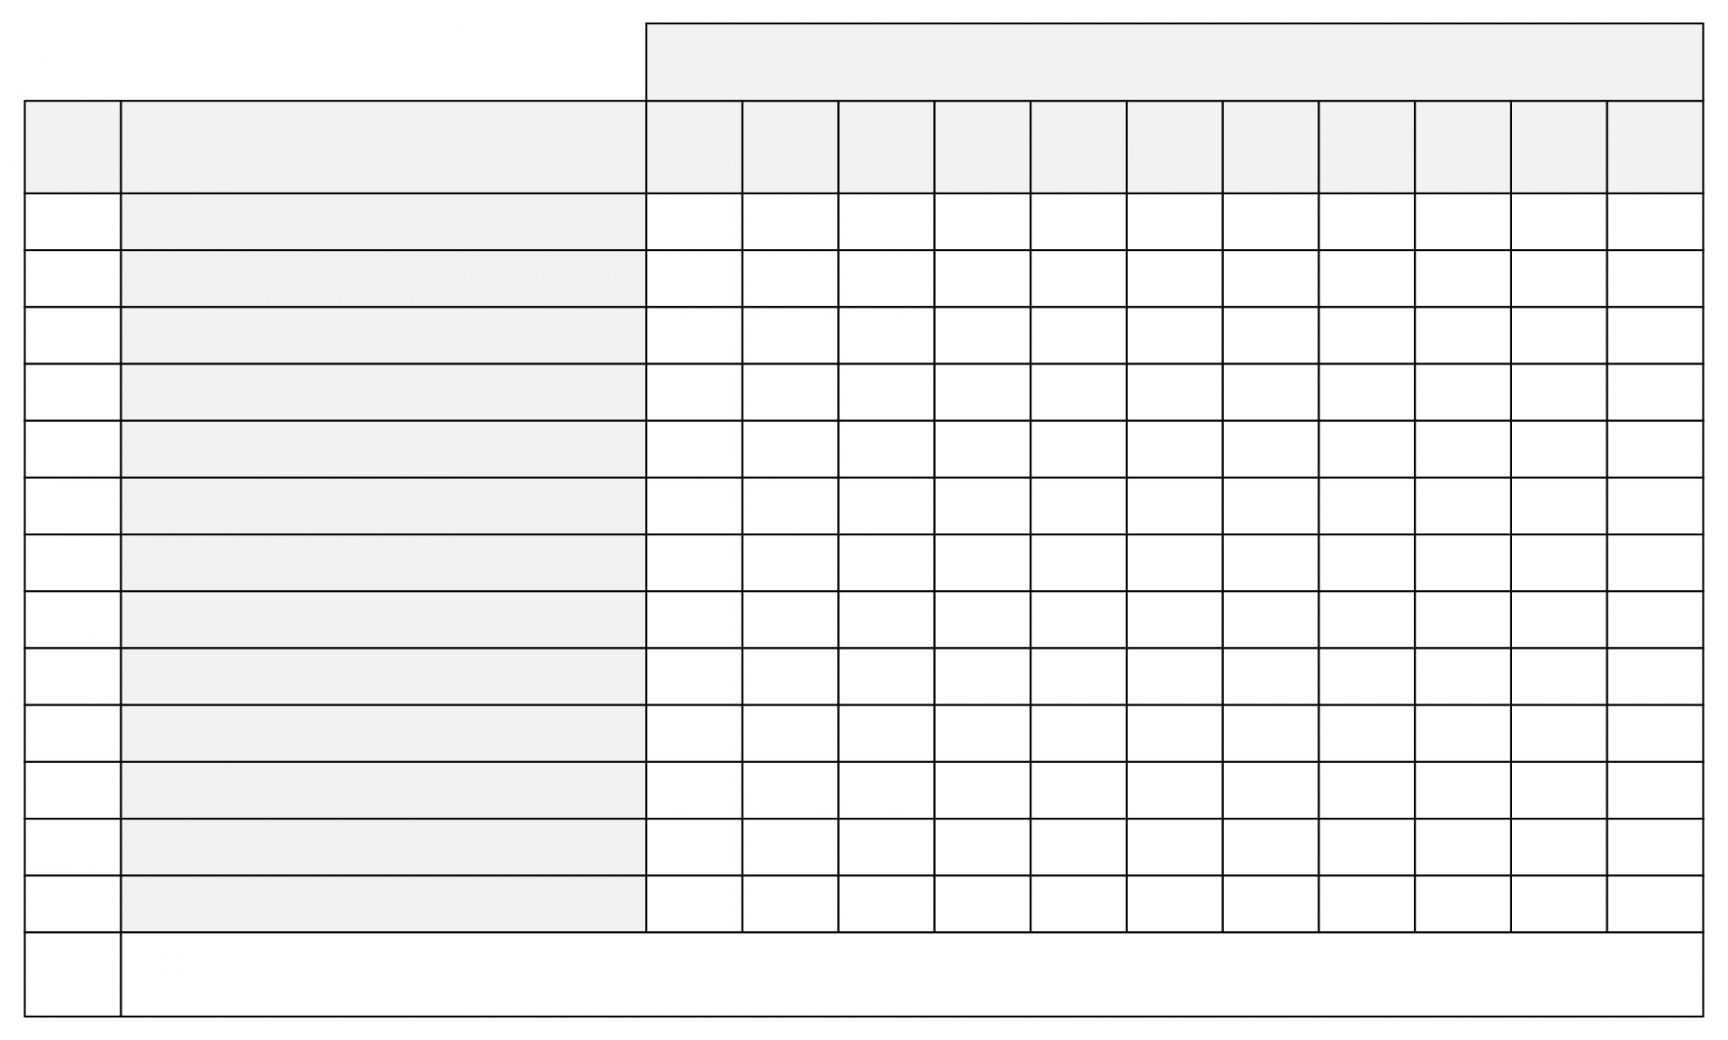 Best Printable Blank Chart With Lines - printablee - Free Printable Blank Charts And Graphs